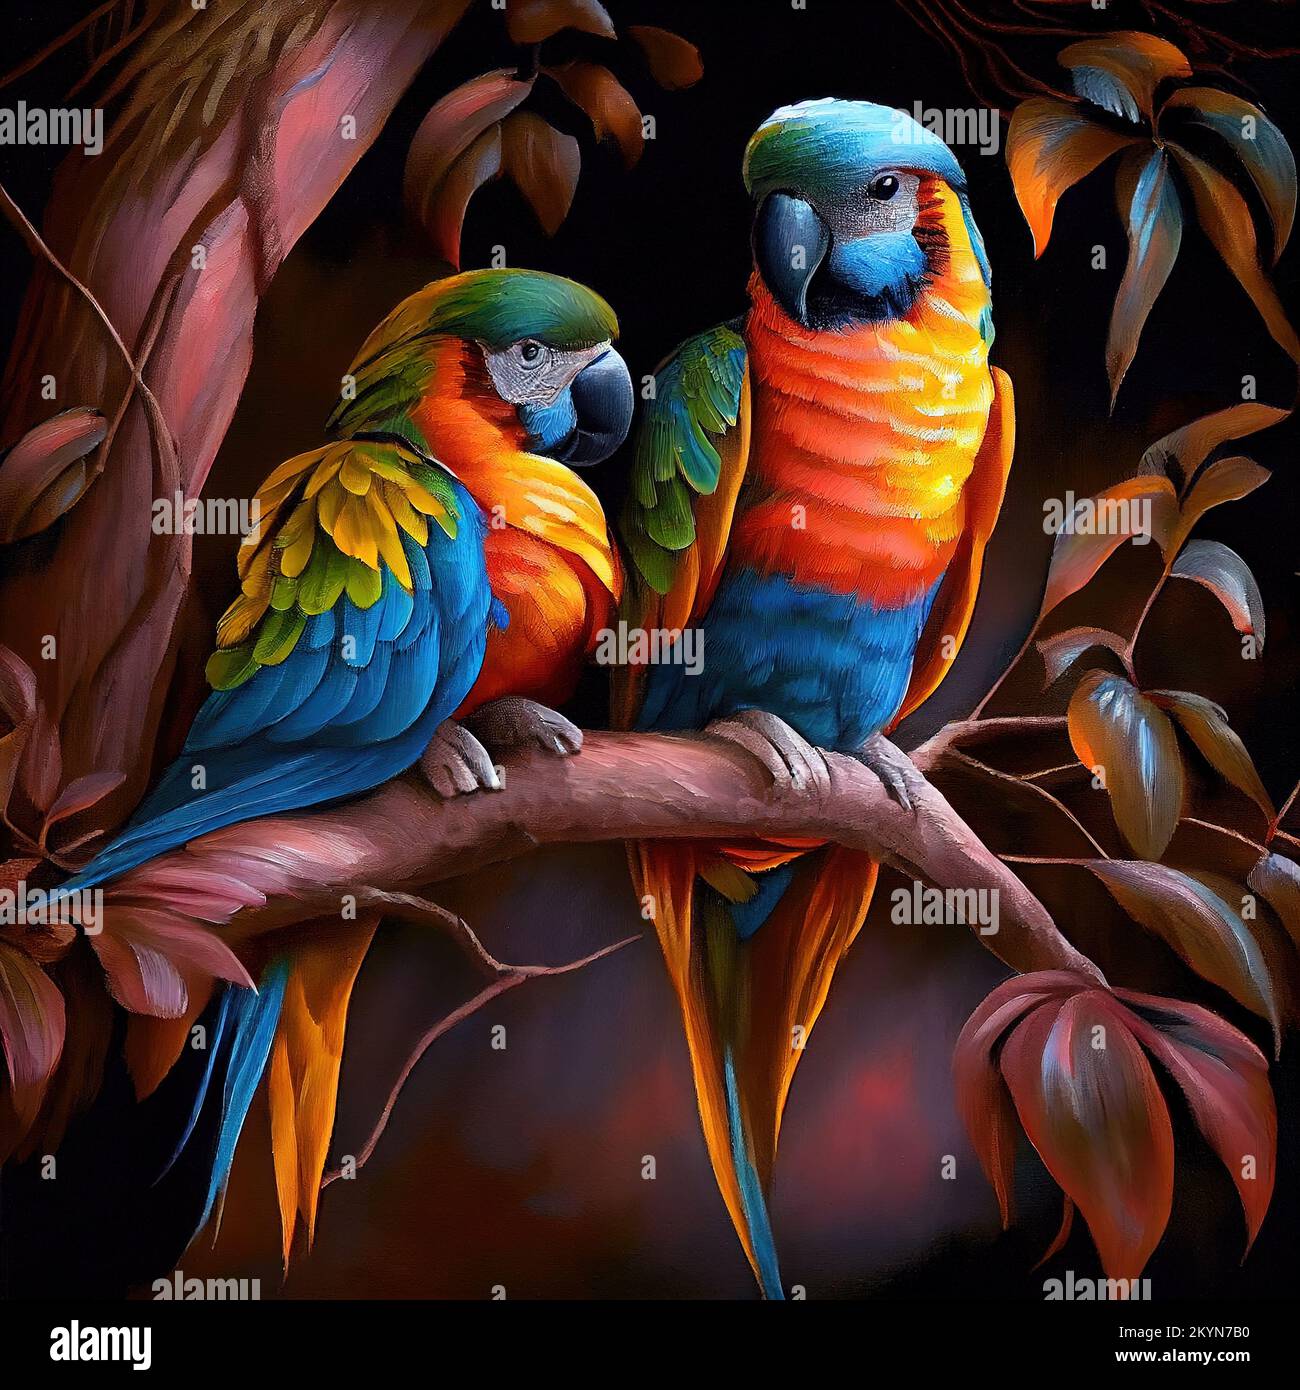 A Digitaly Generated Painting Of Two Colorful Parrots Sitting On A Tree